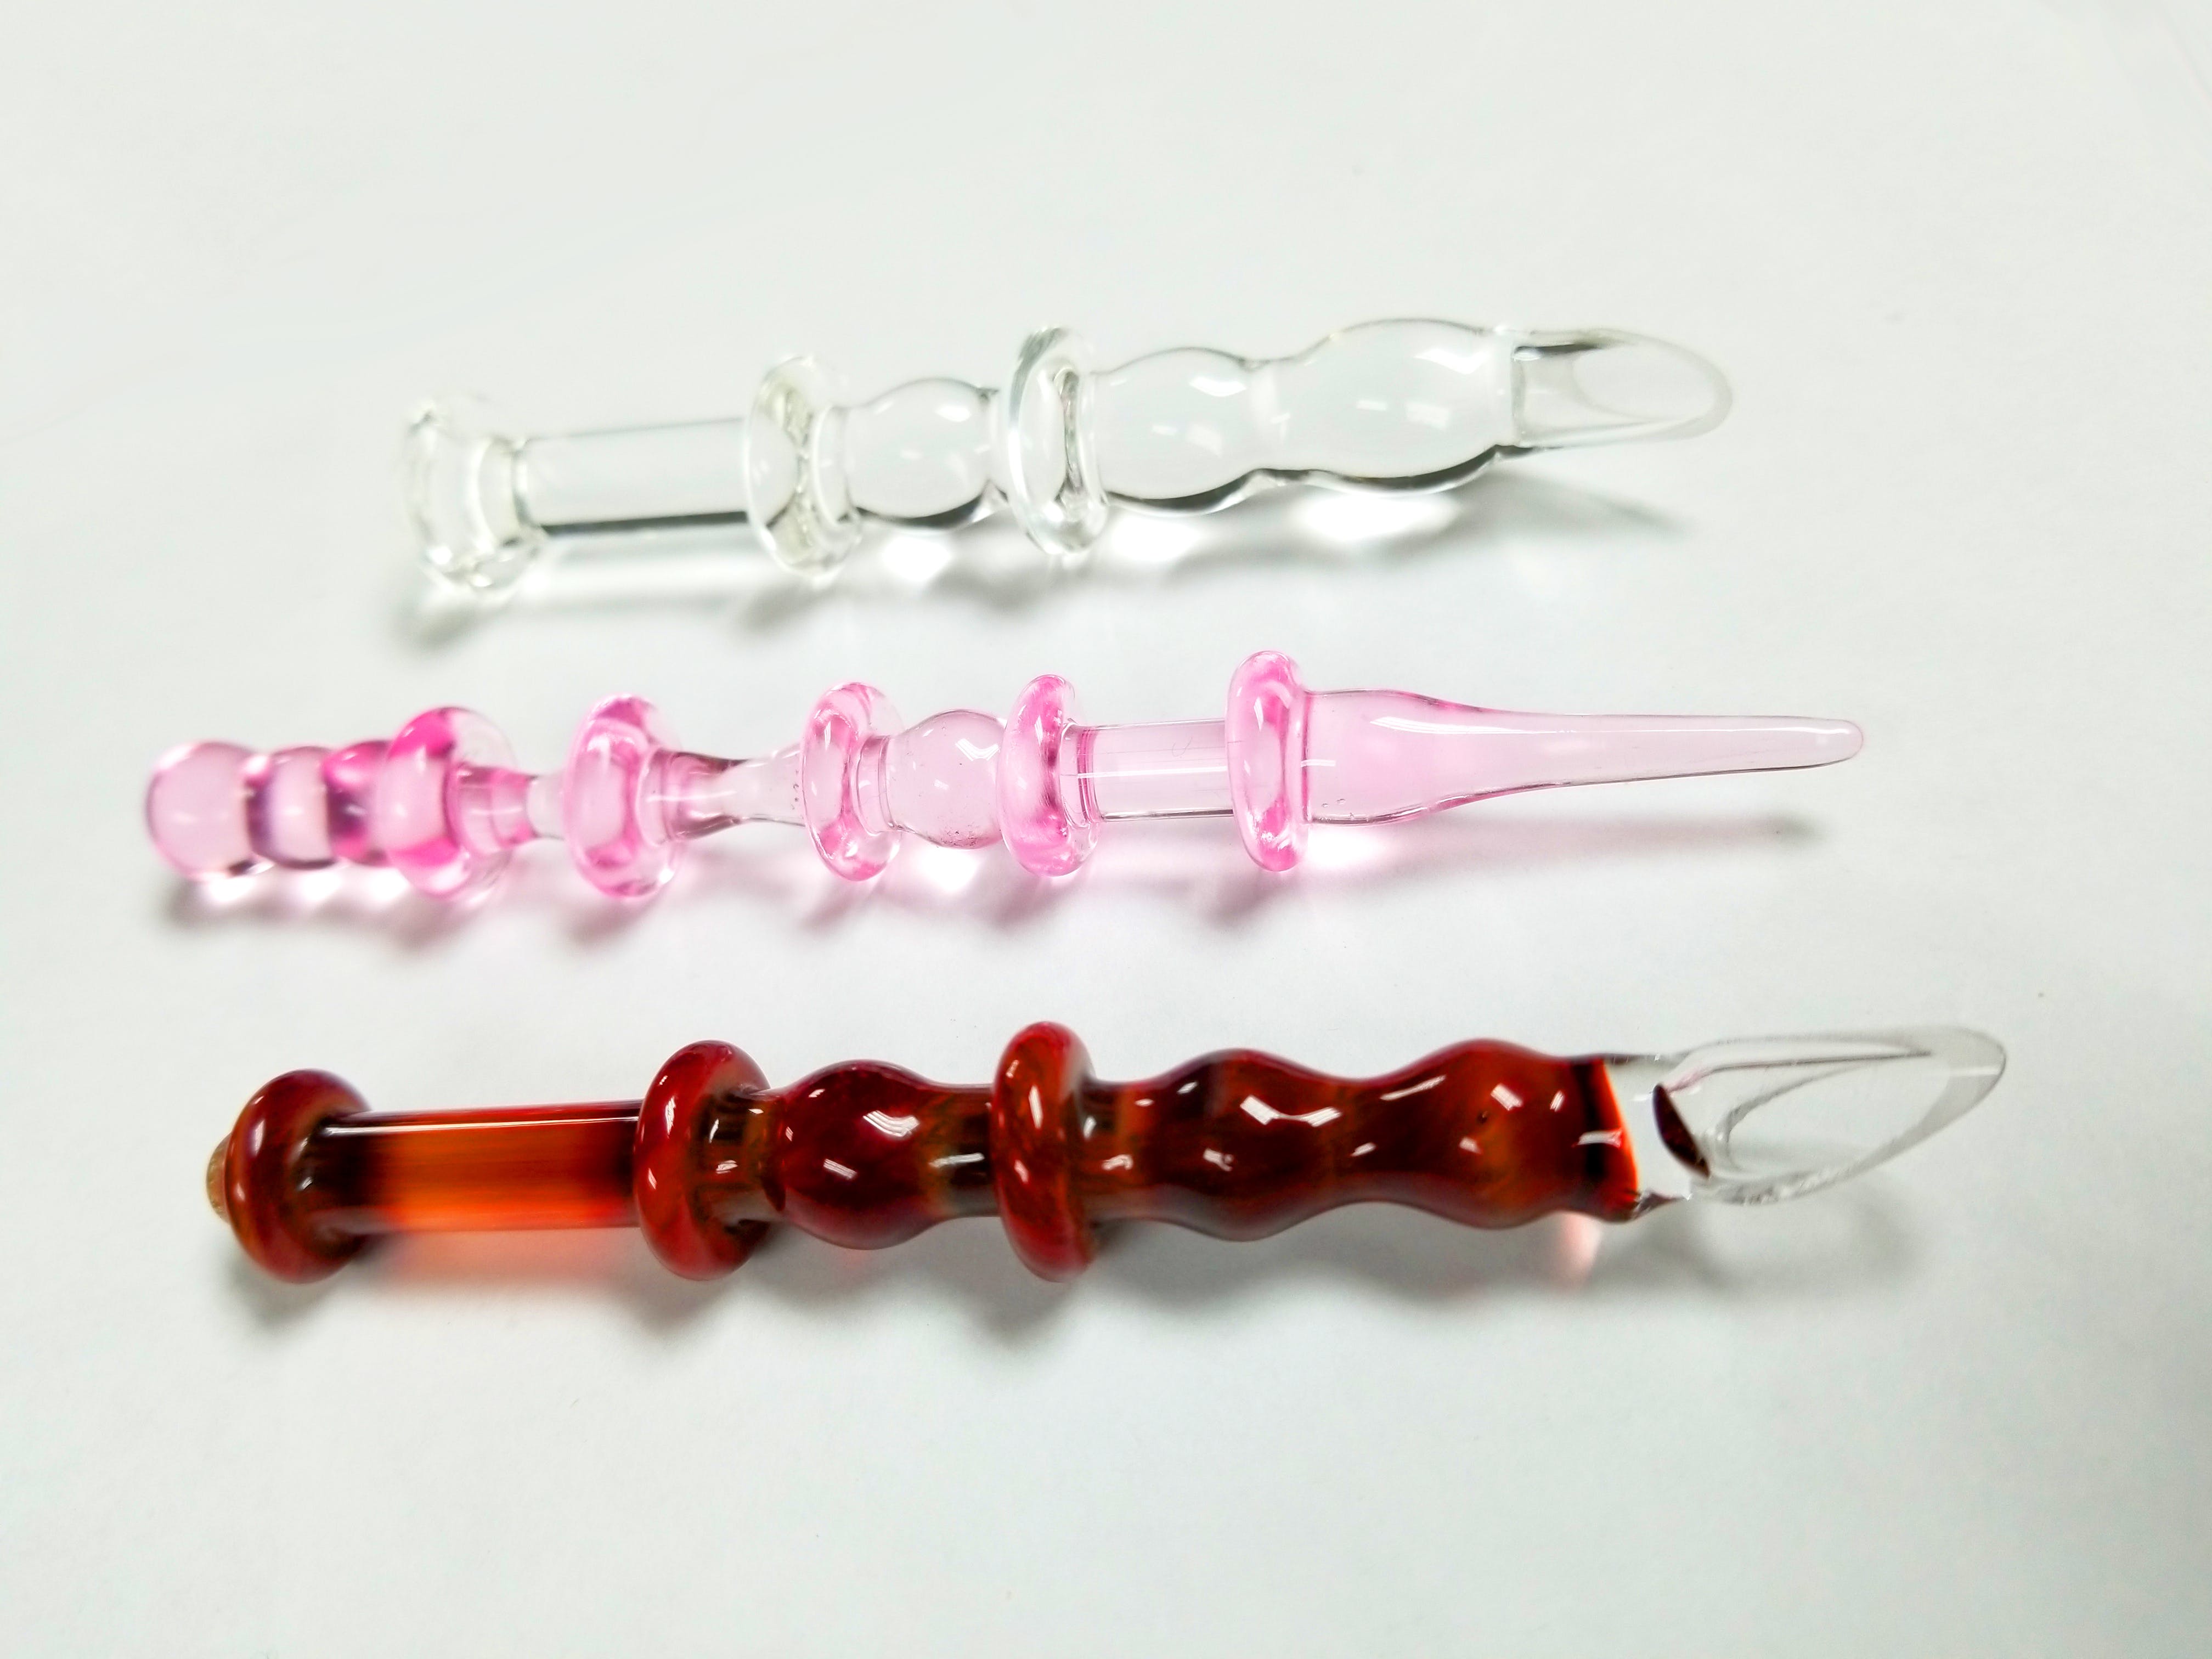 gear-assorted-glass-dab-tools-by-jeric-glass